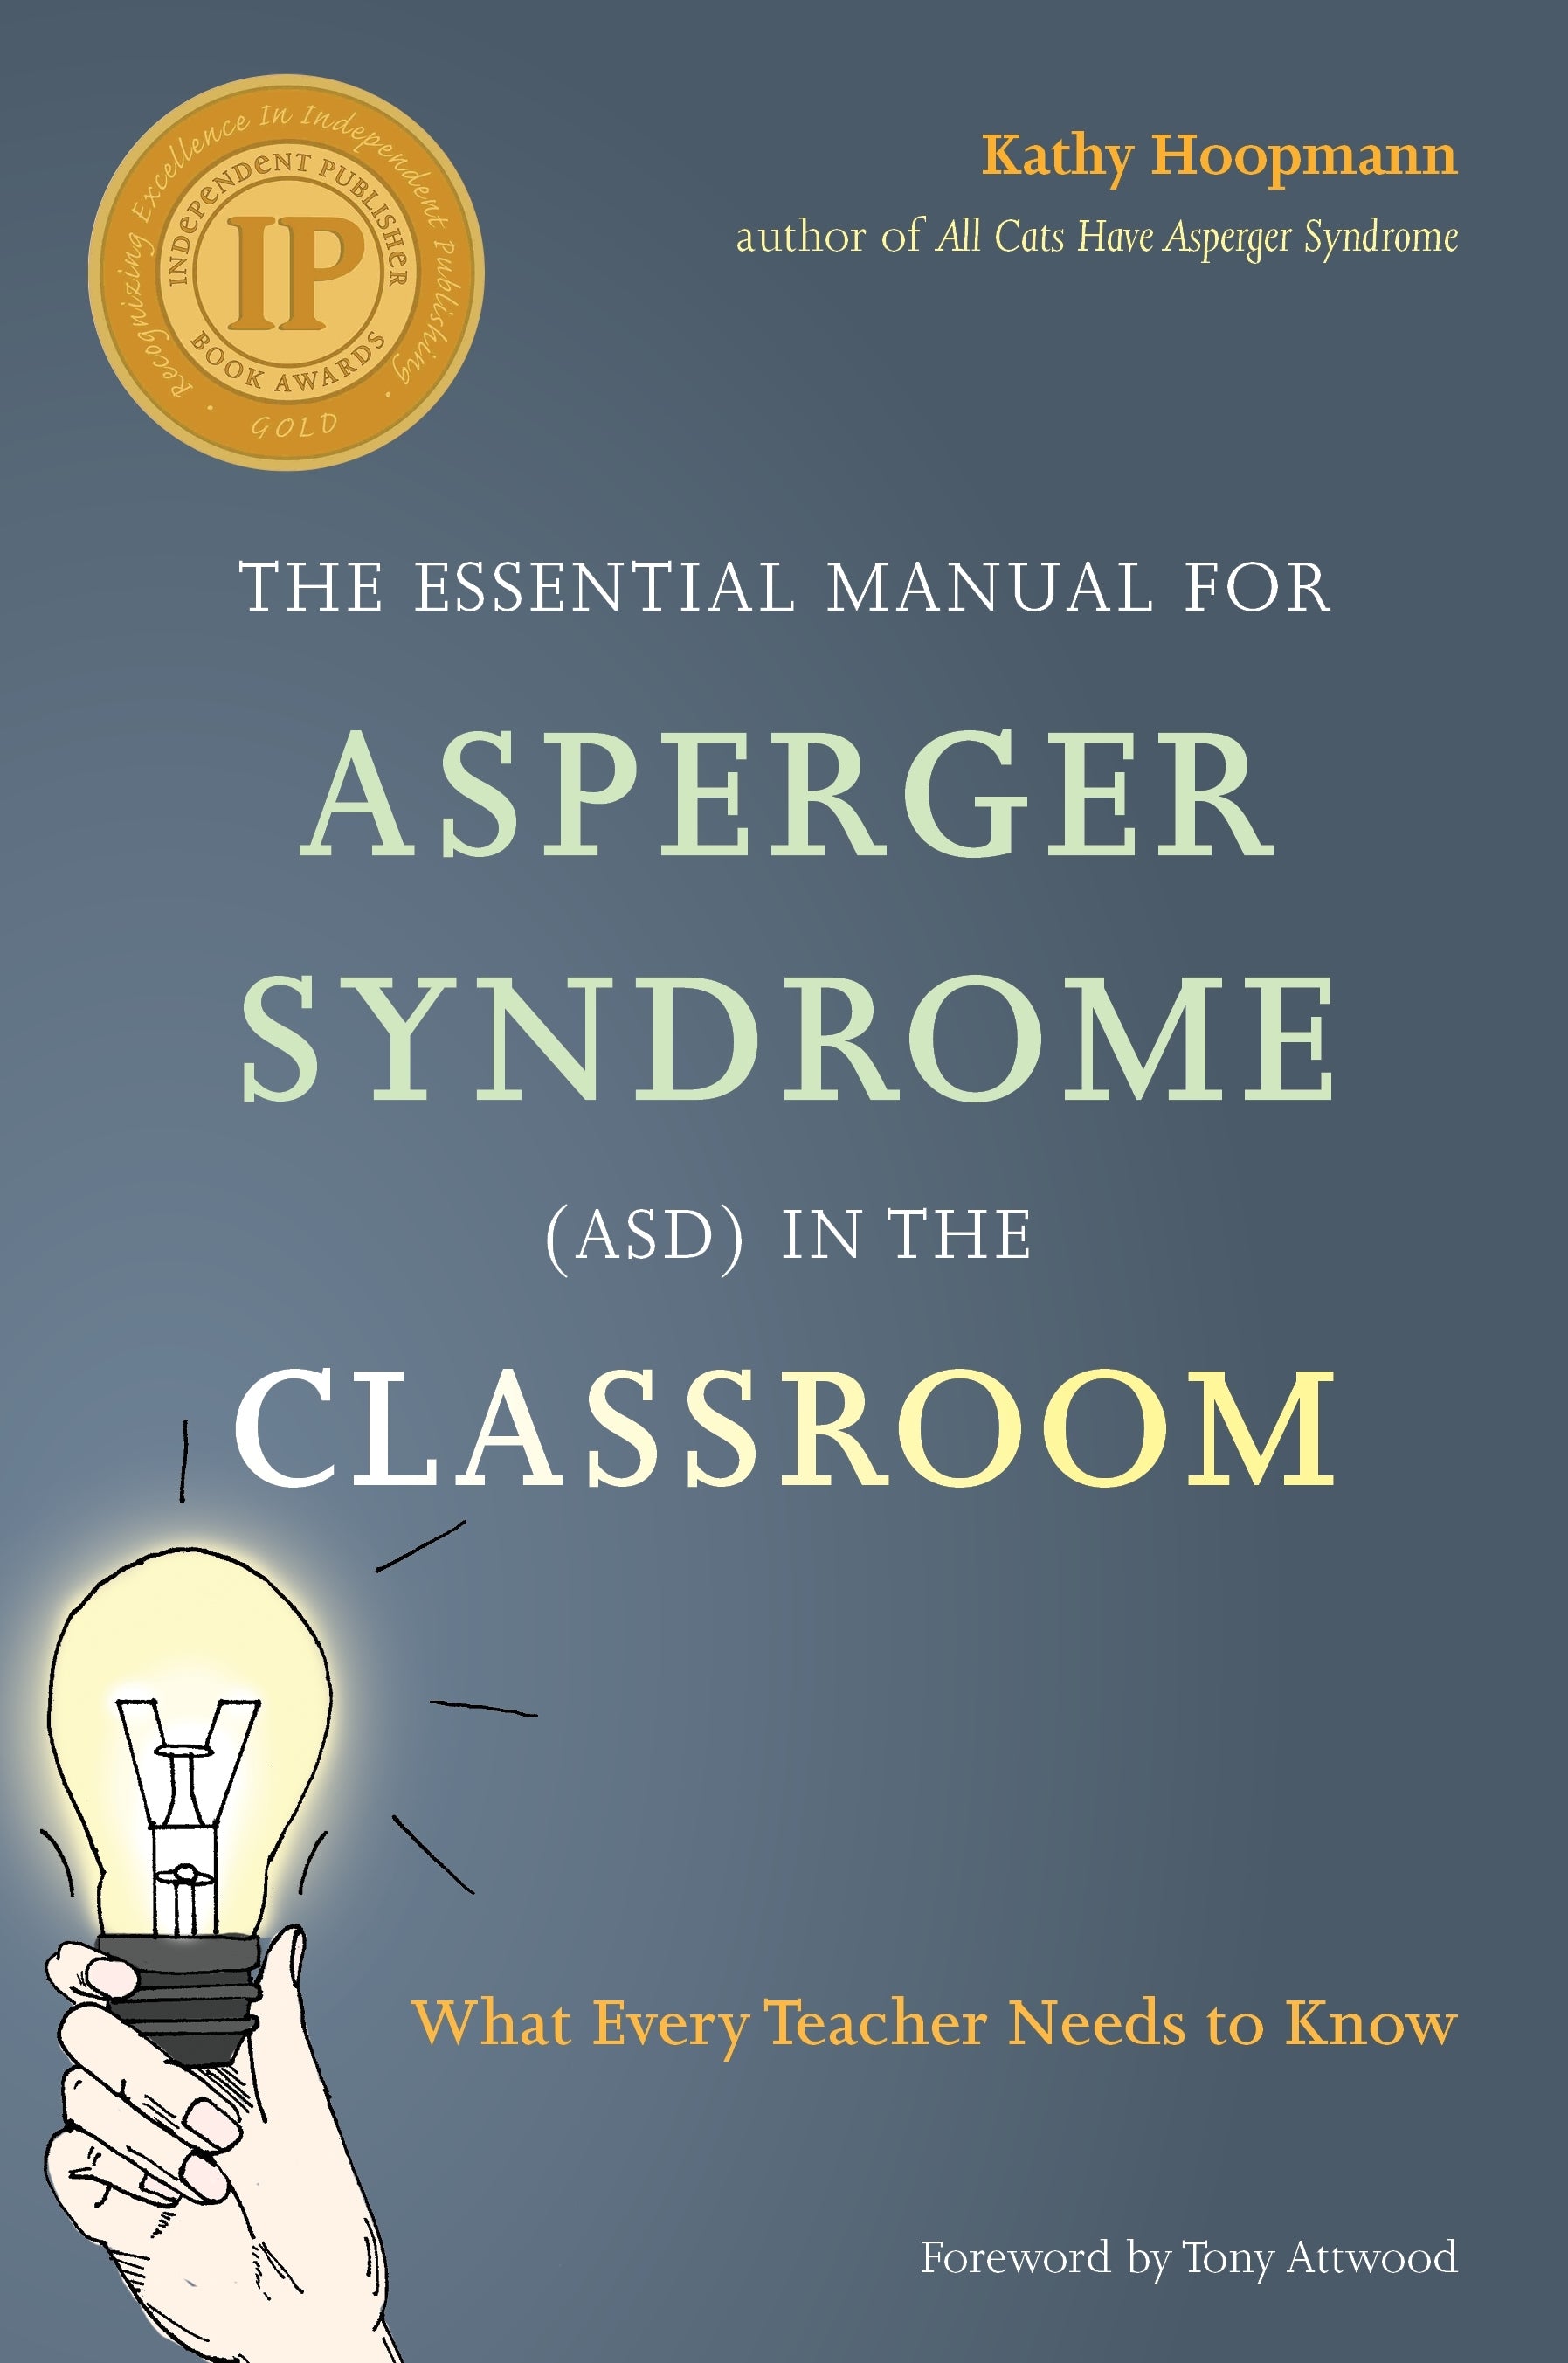 The Essential Manual for Asperger Syndrome (ASD) in the Classroom by Rebecca Houkamau, Kathy Hoopmann